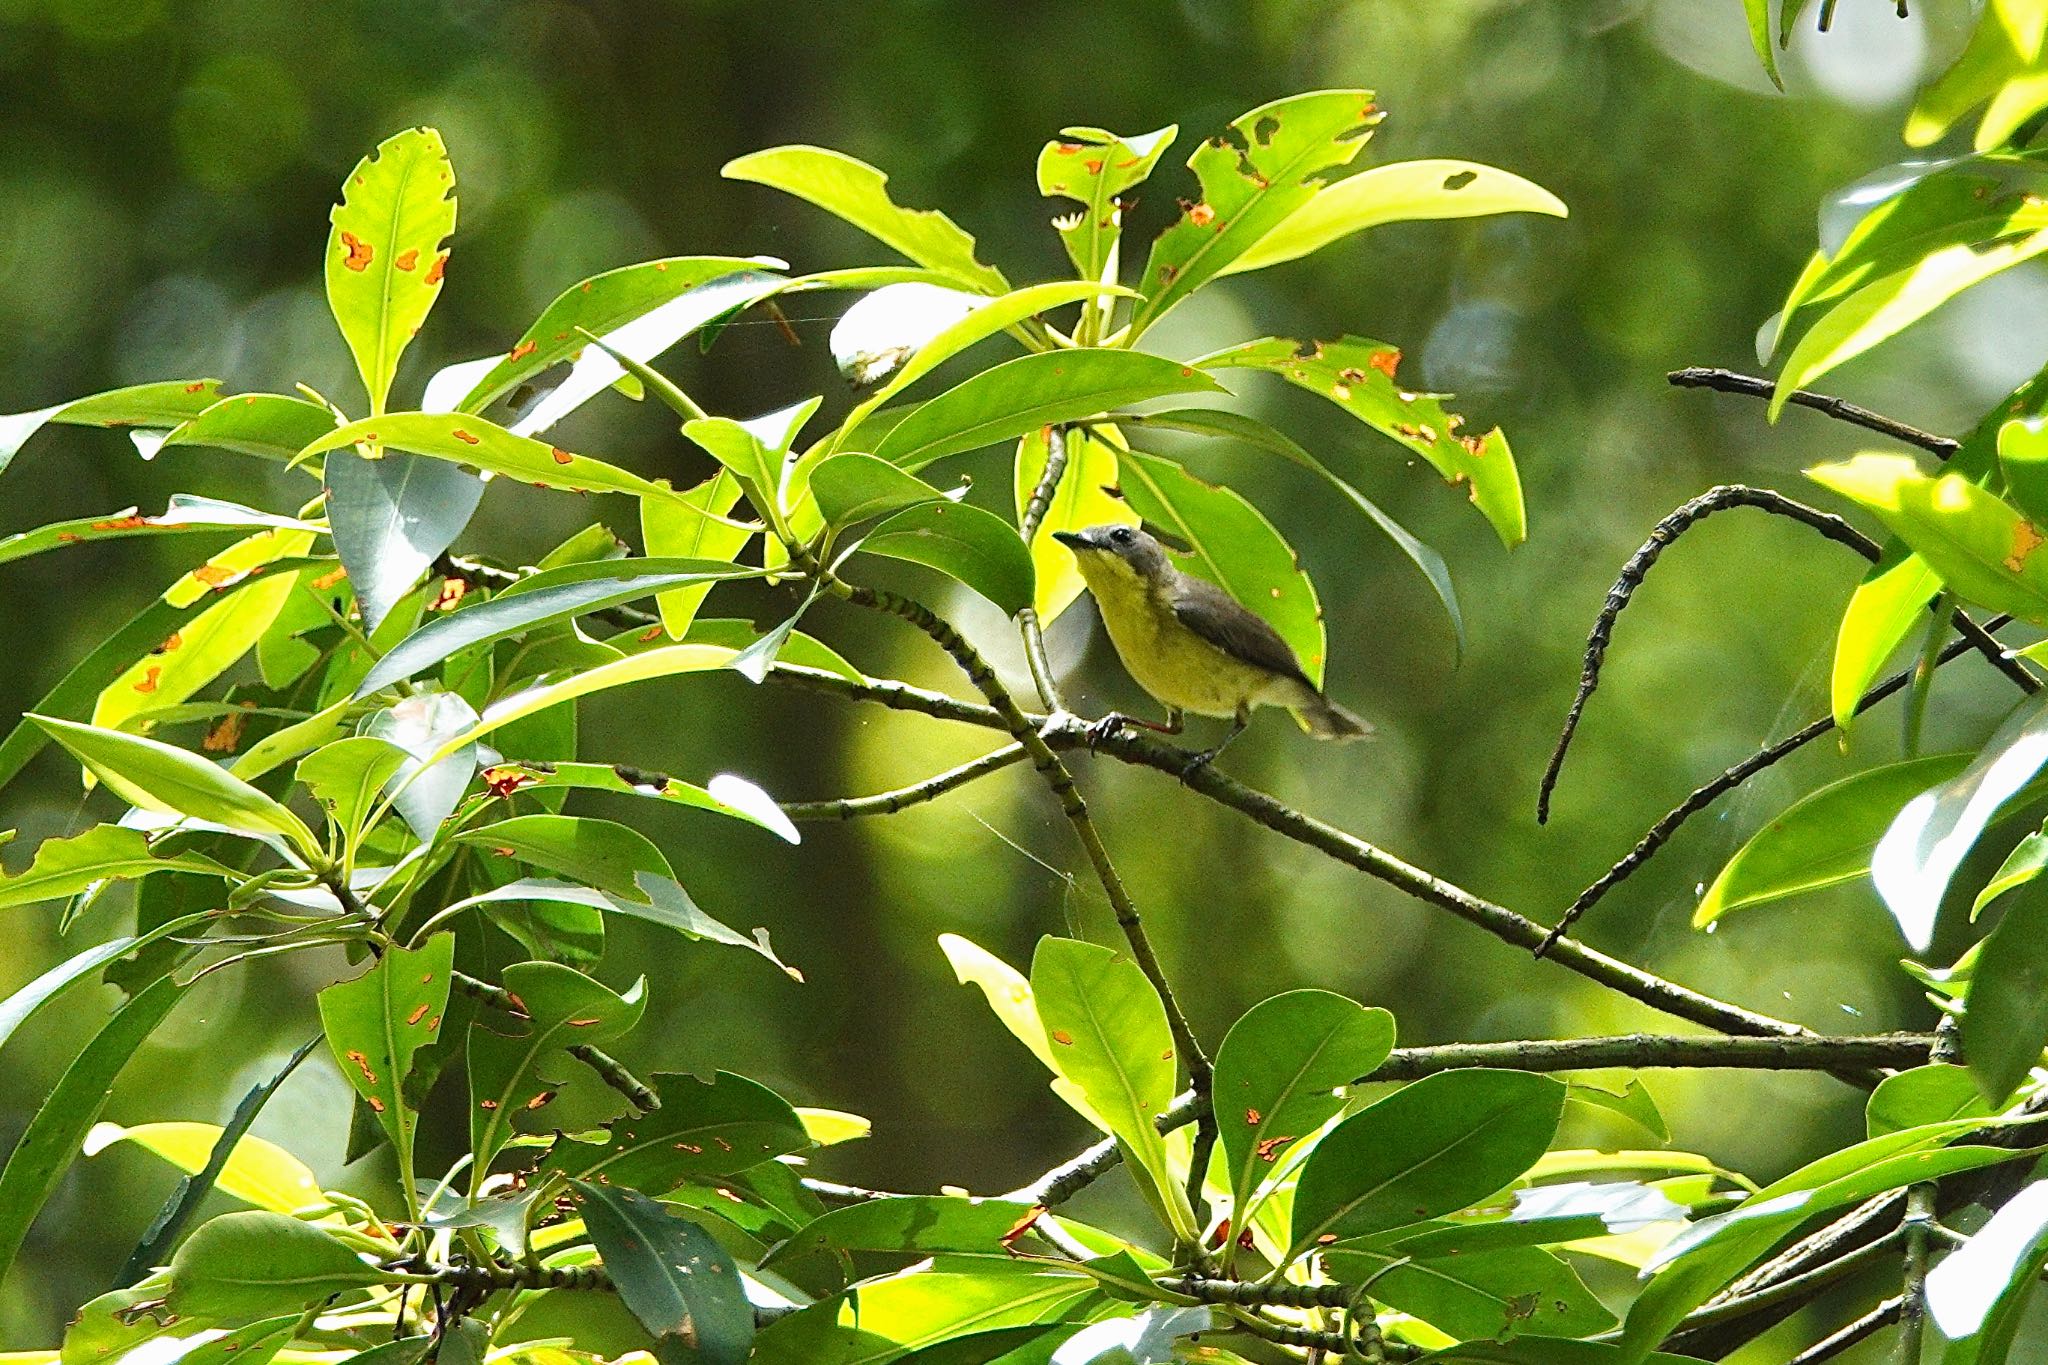 Photo of Golden-bellied Gerygone at Taman Alam Kuala Selangor by のどか